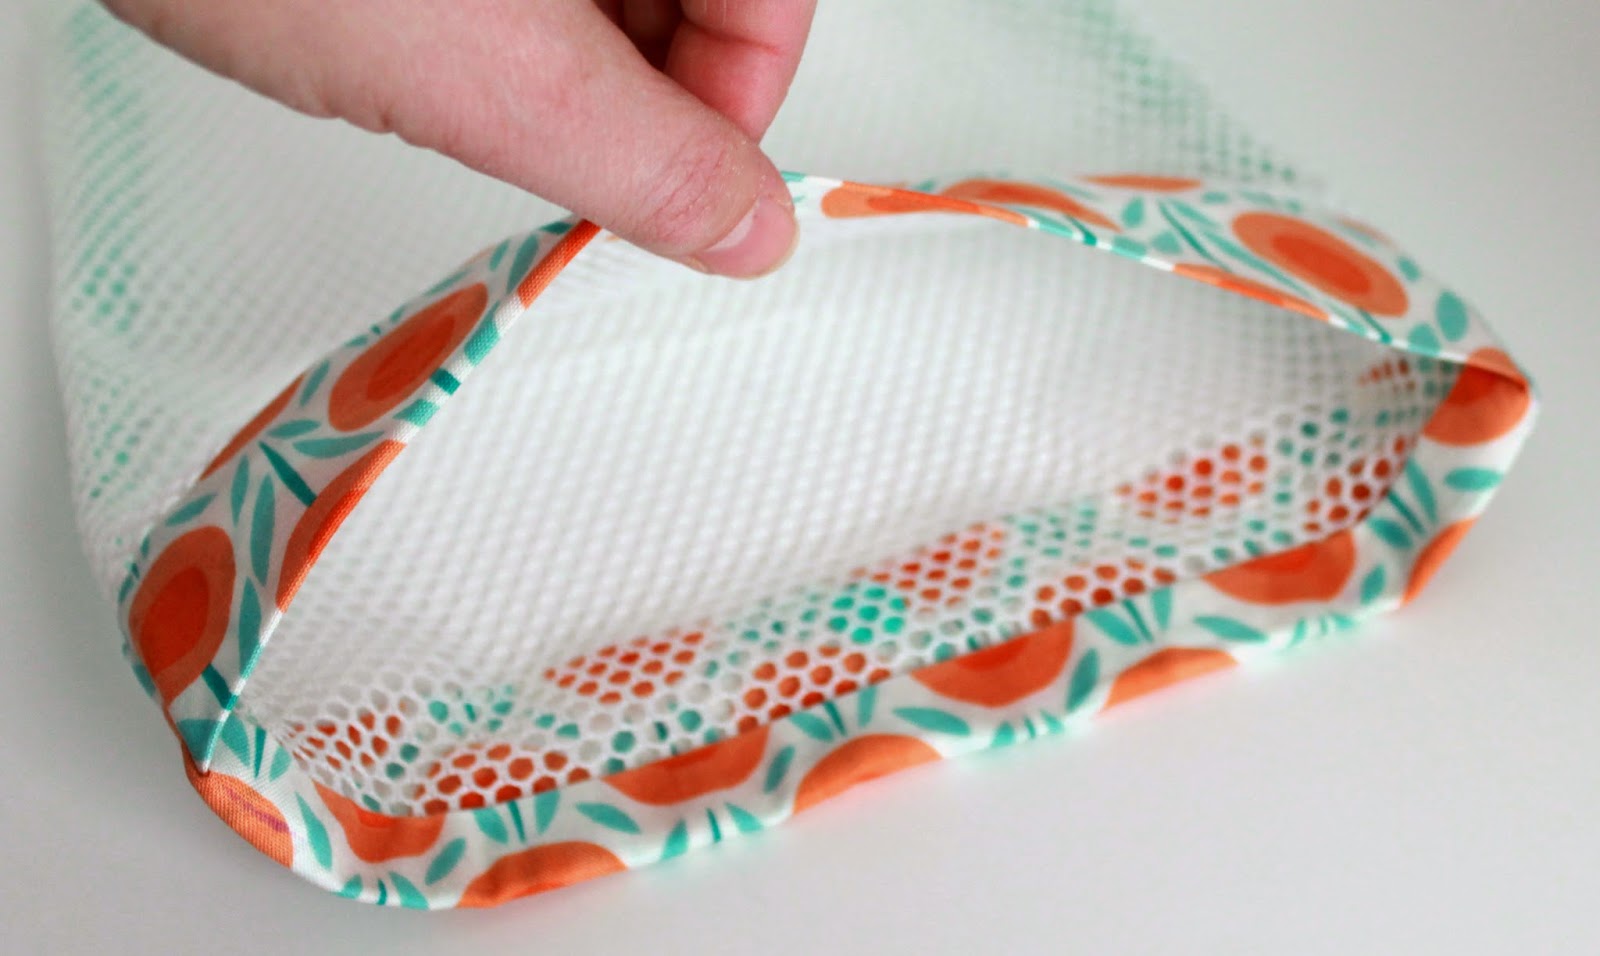 Simple Mesh Bag Tutorial: great for produce or organizing! | Step by step directions how to sew a mesh bag with a simple fold-over closure, no zipper. | The Inspired Wren